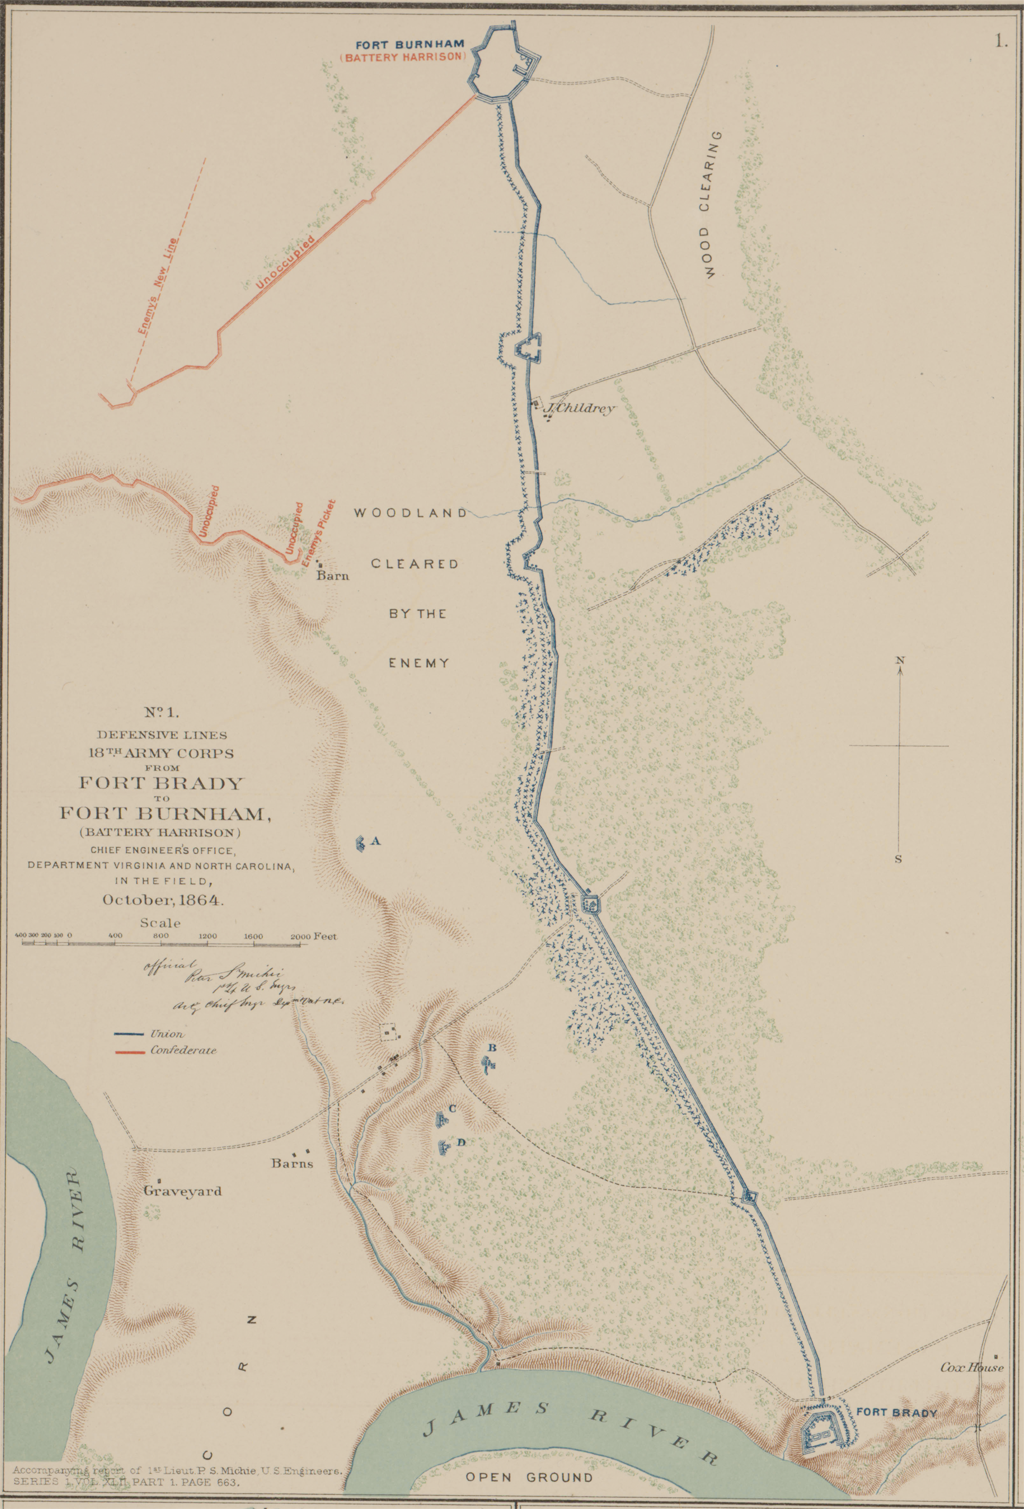 No. 1 Defensive Lines 18th Army Corps from Fort Brady to Fort Burnham (Battery Harrison) October 1864 (OR Atlas 68:1)